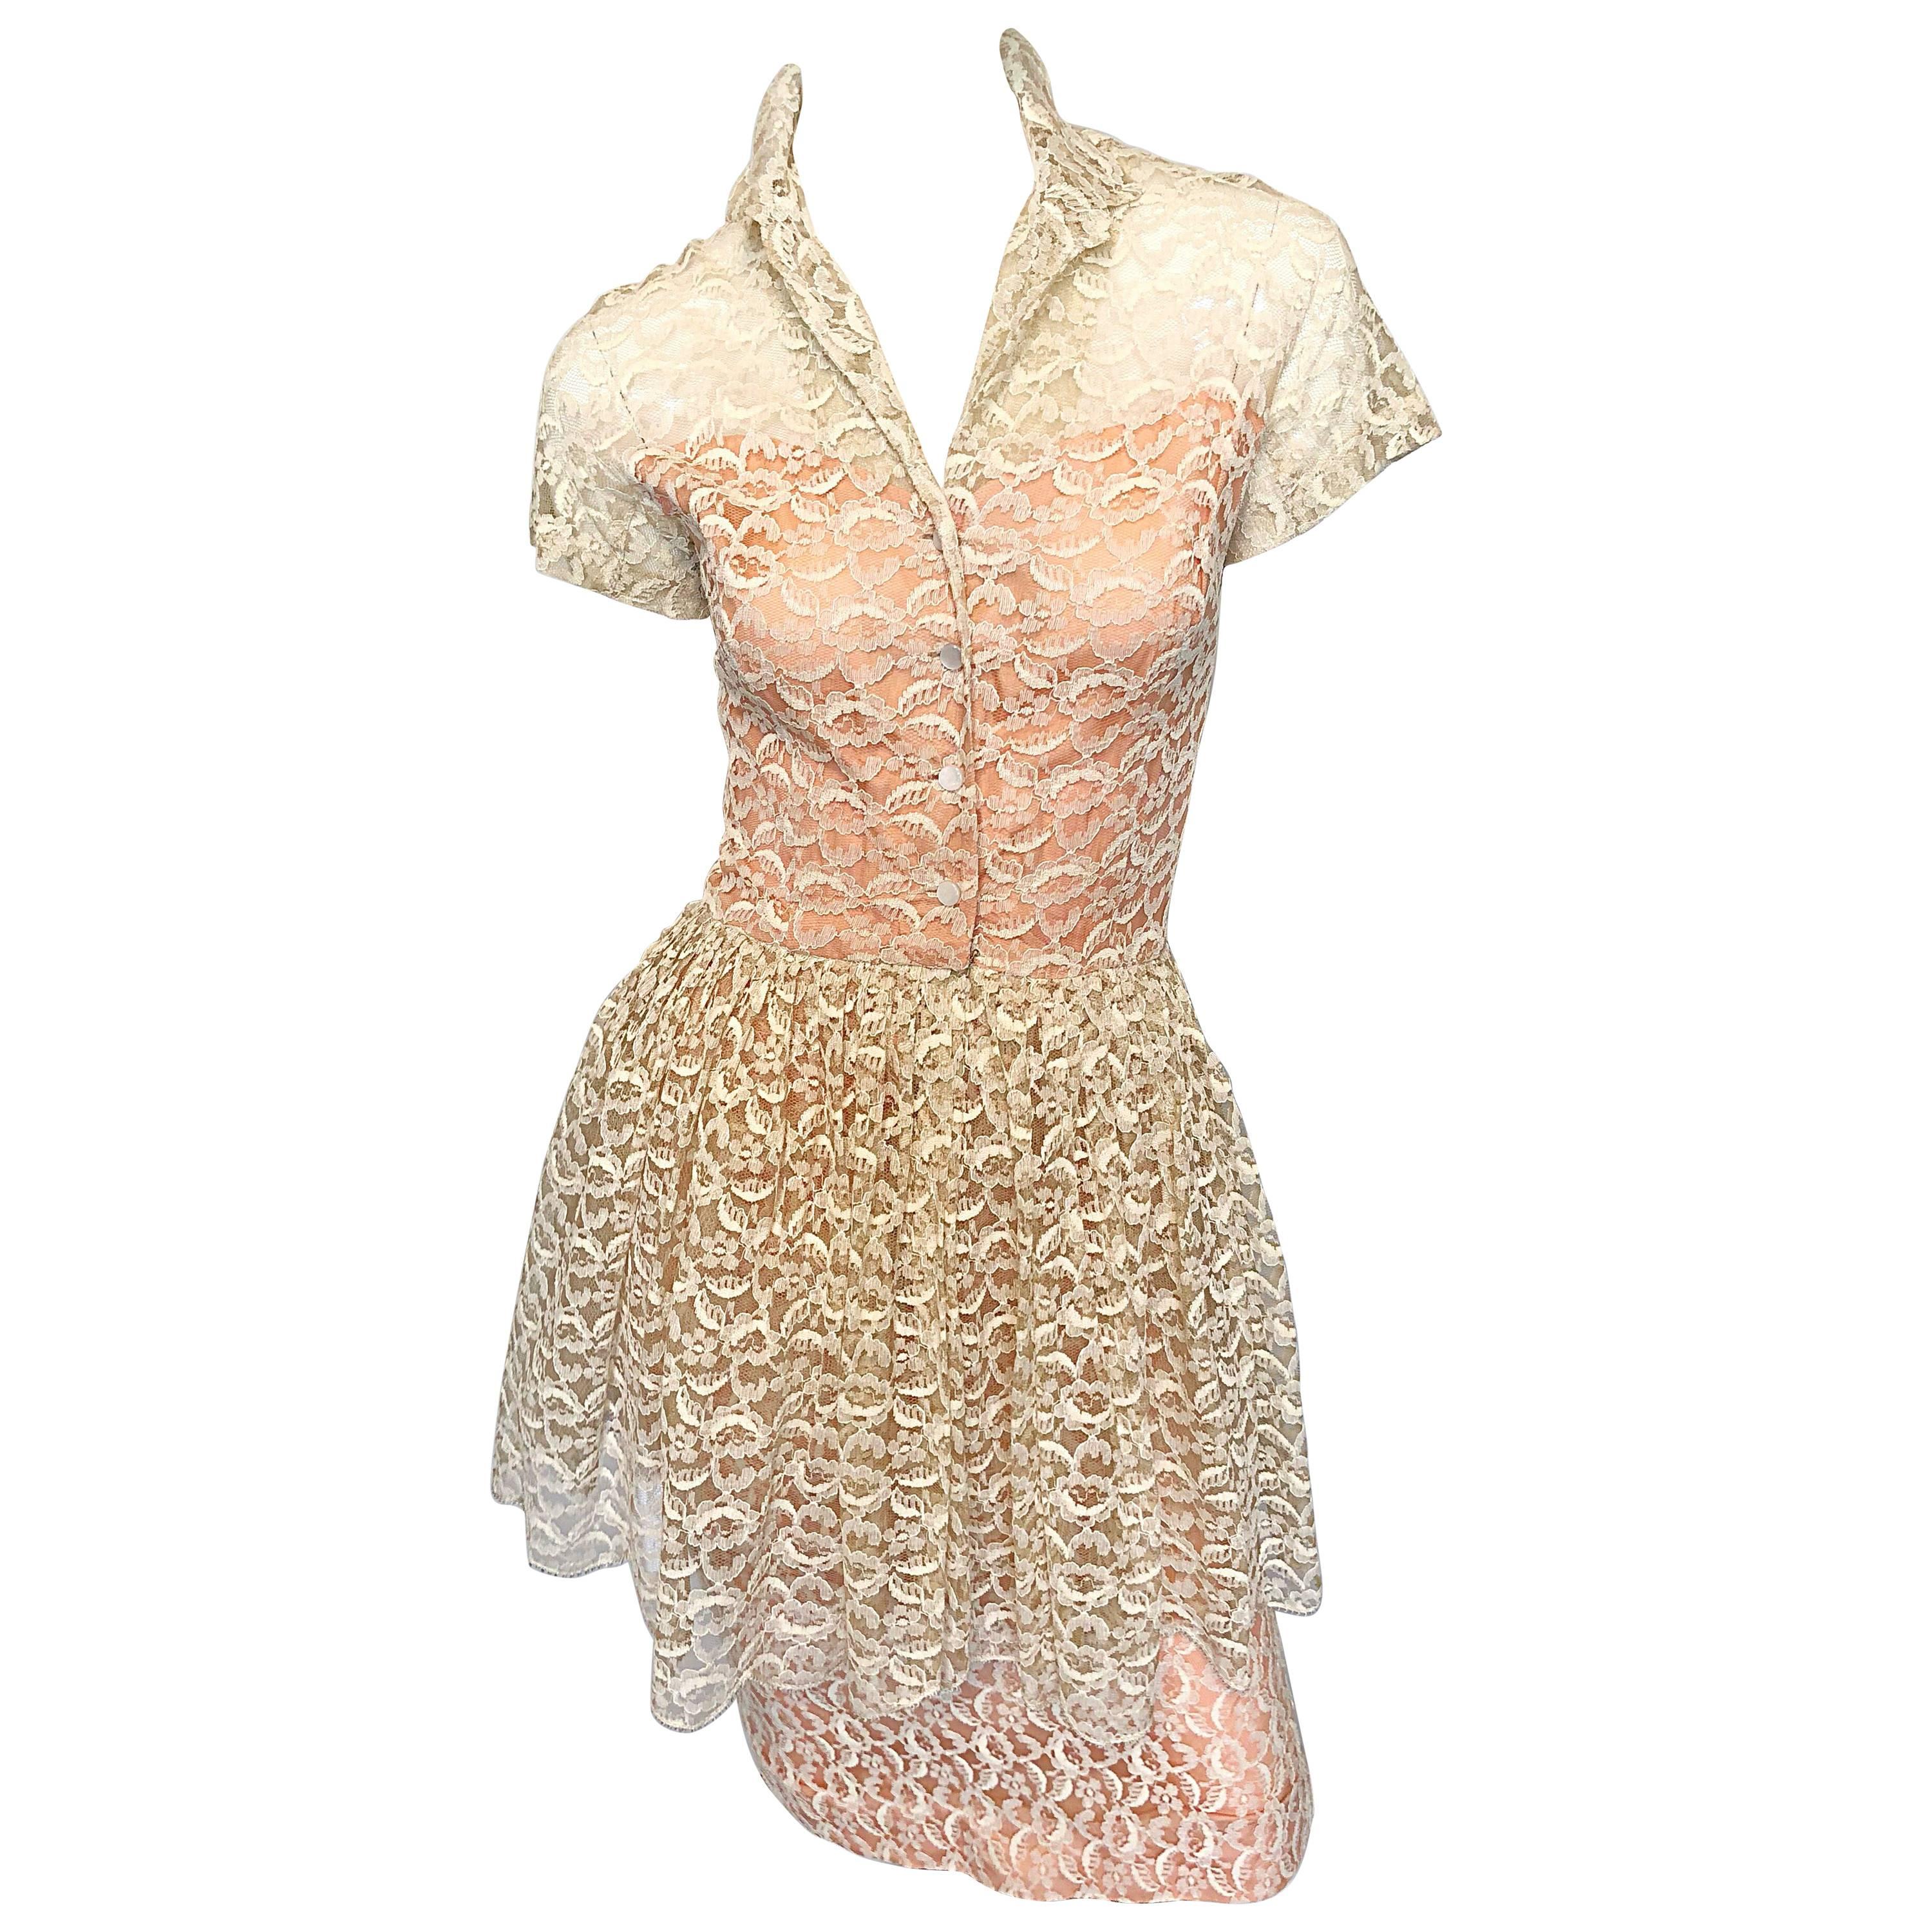 Demi Couture 1950s Neusteters Ivory + Pink Silk French Lace Vintage Peplum Dress